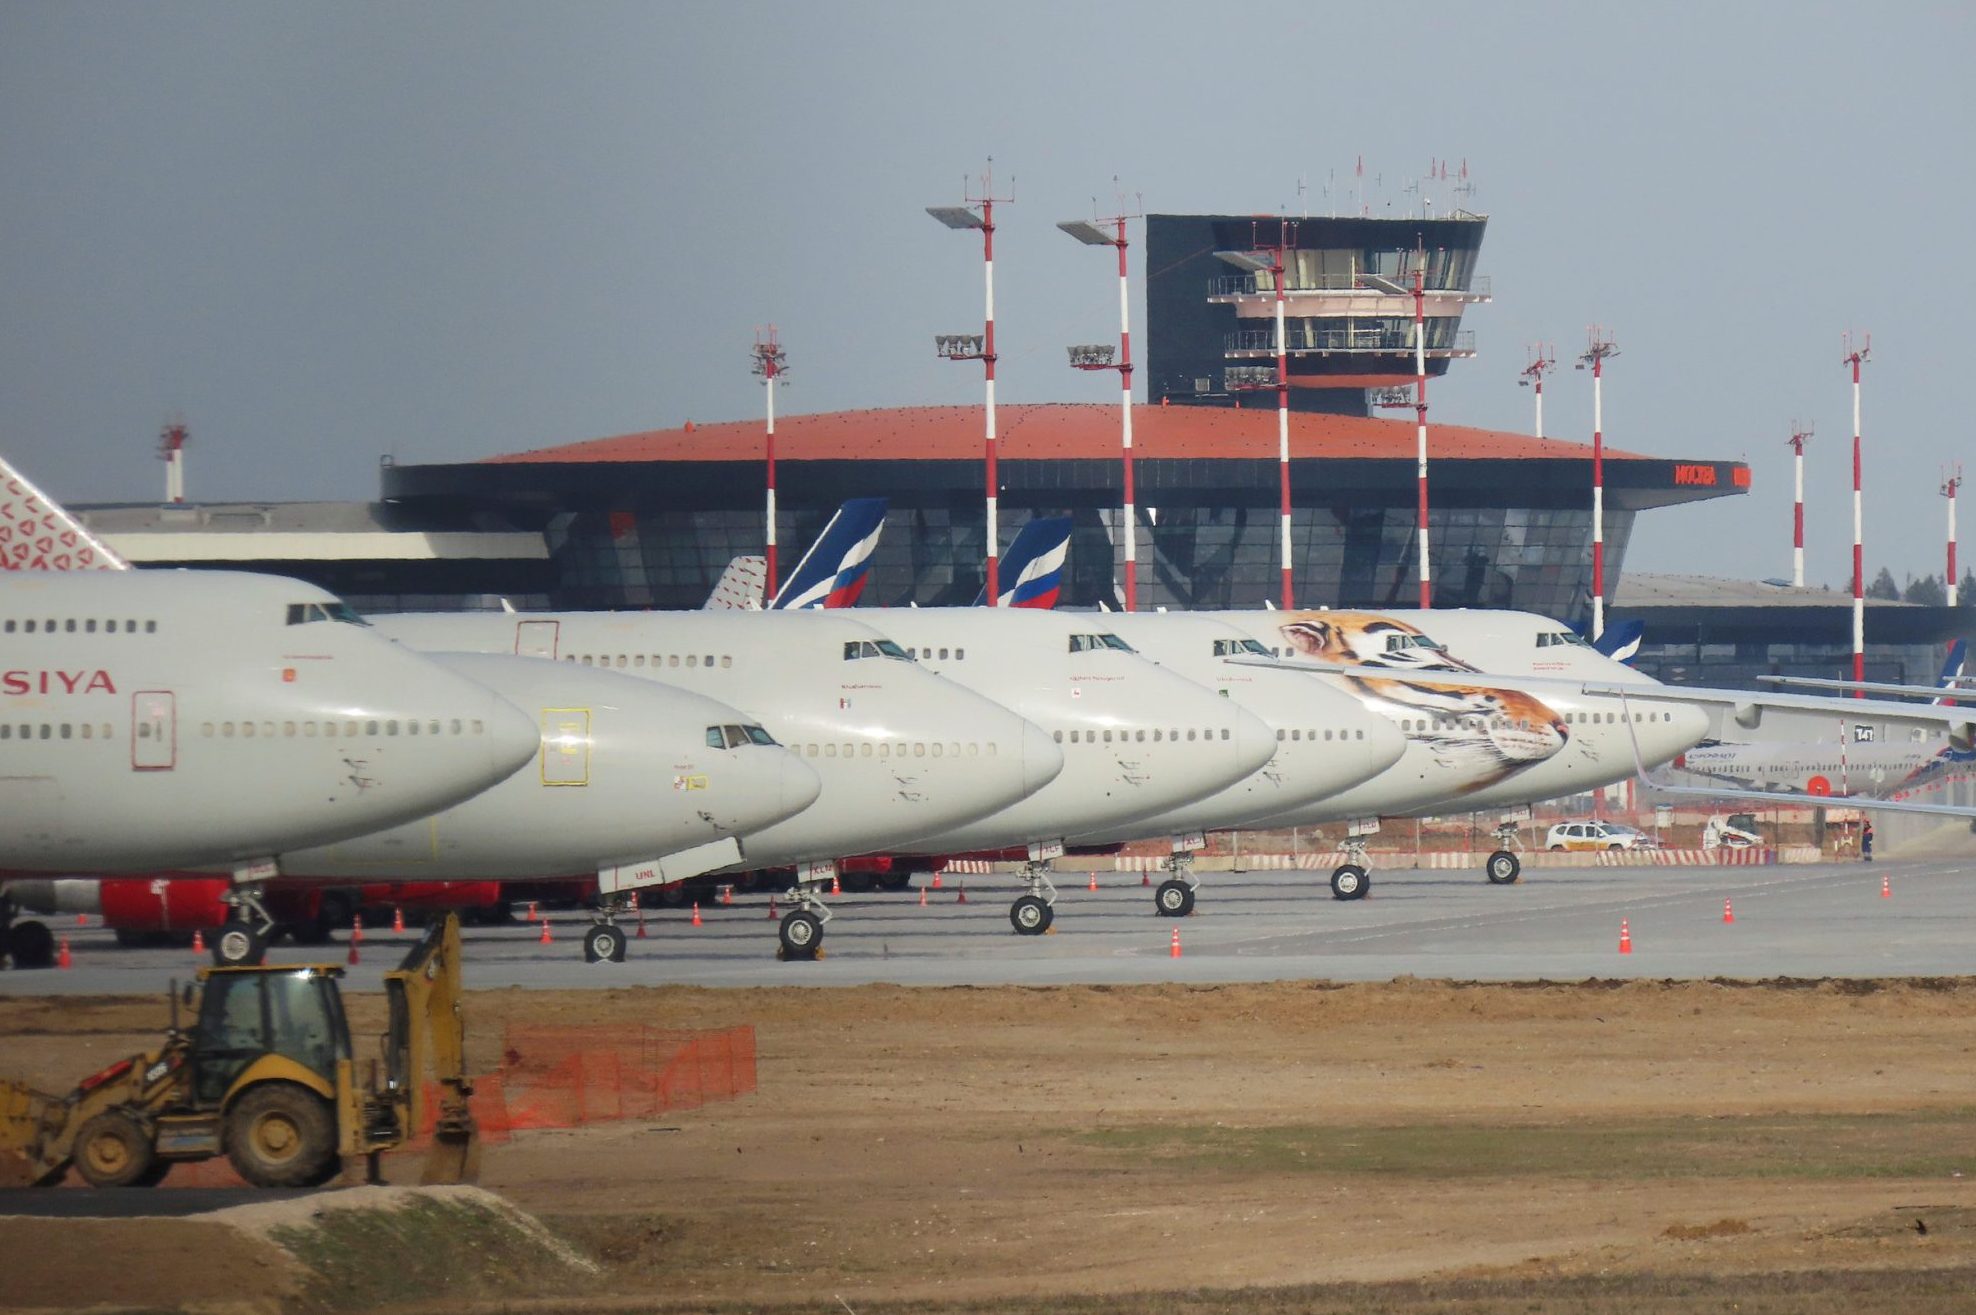 Planes parked at Sheremetyevo International Airport, outside Moscow, Russia.